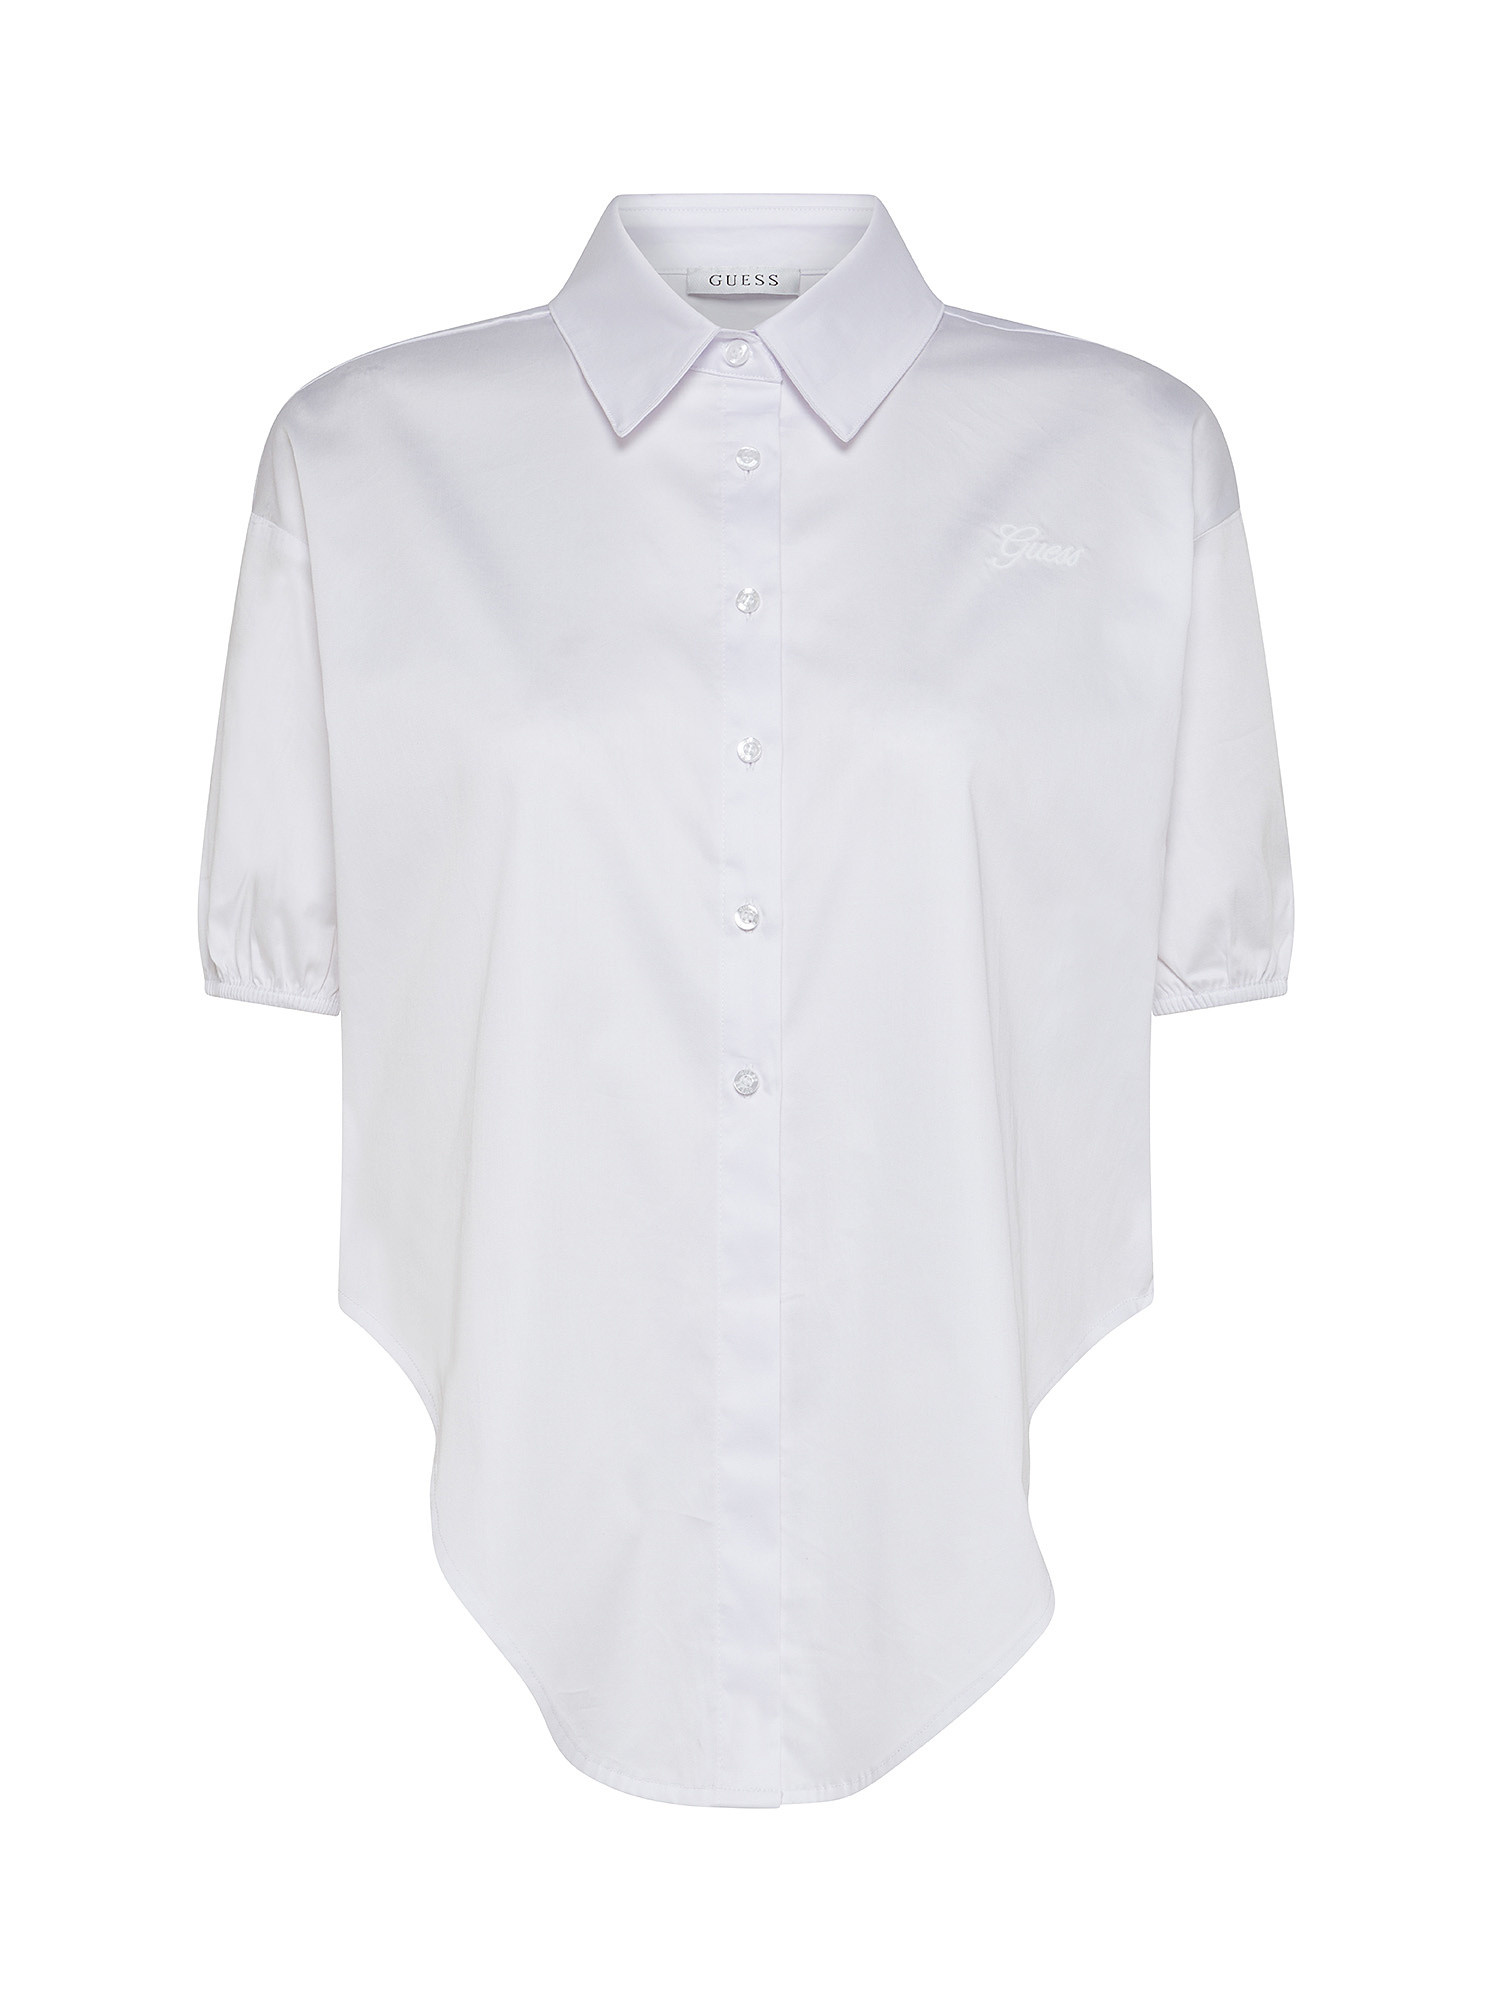 GUESS - Shirt to tie on the front, White, large image number 0